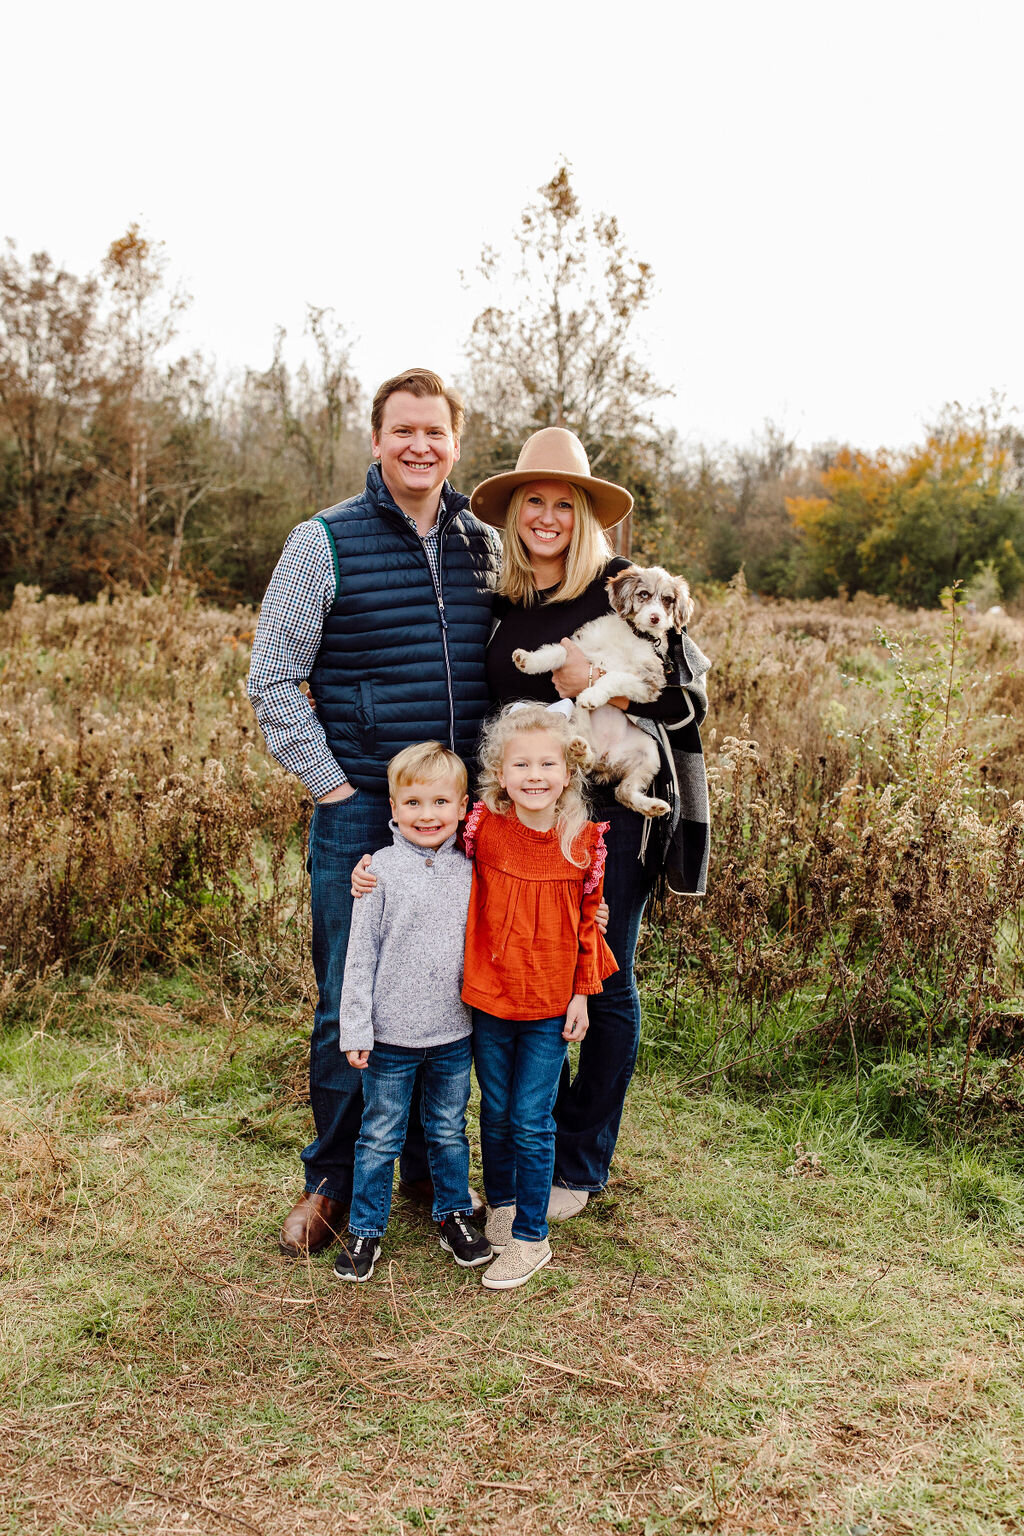 ACGoodman_Photography_Billings_Family_Meads_Quarry_Ijams_Knoxville_Tennessee-1